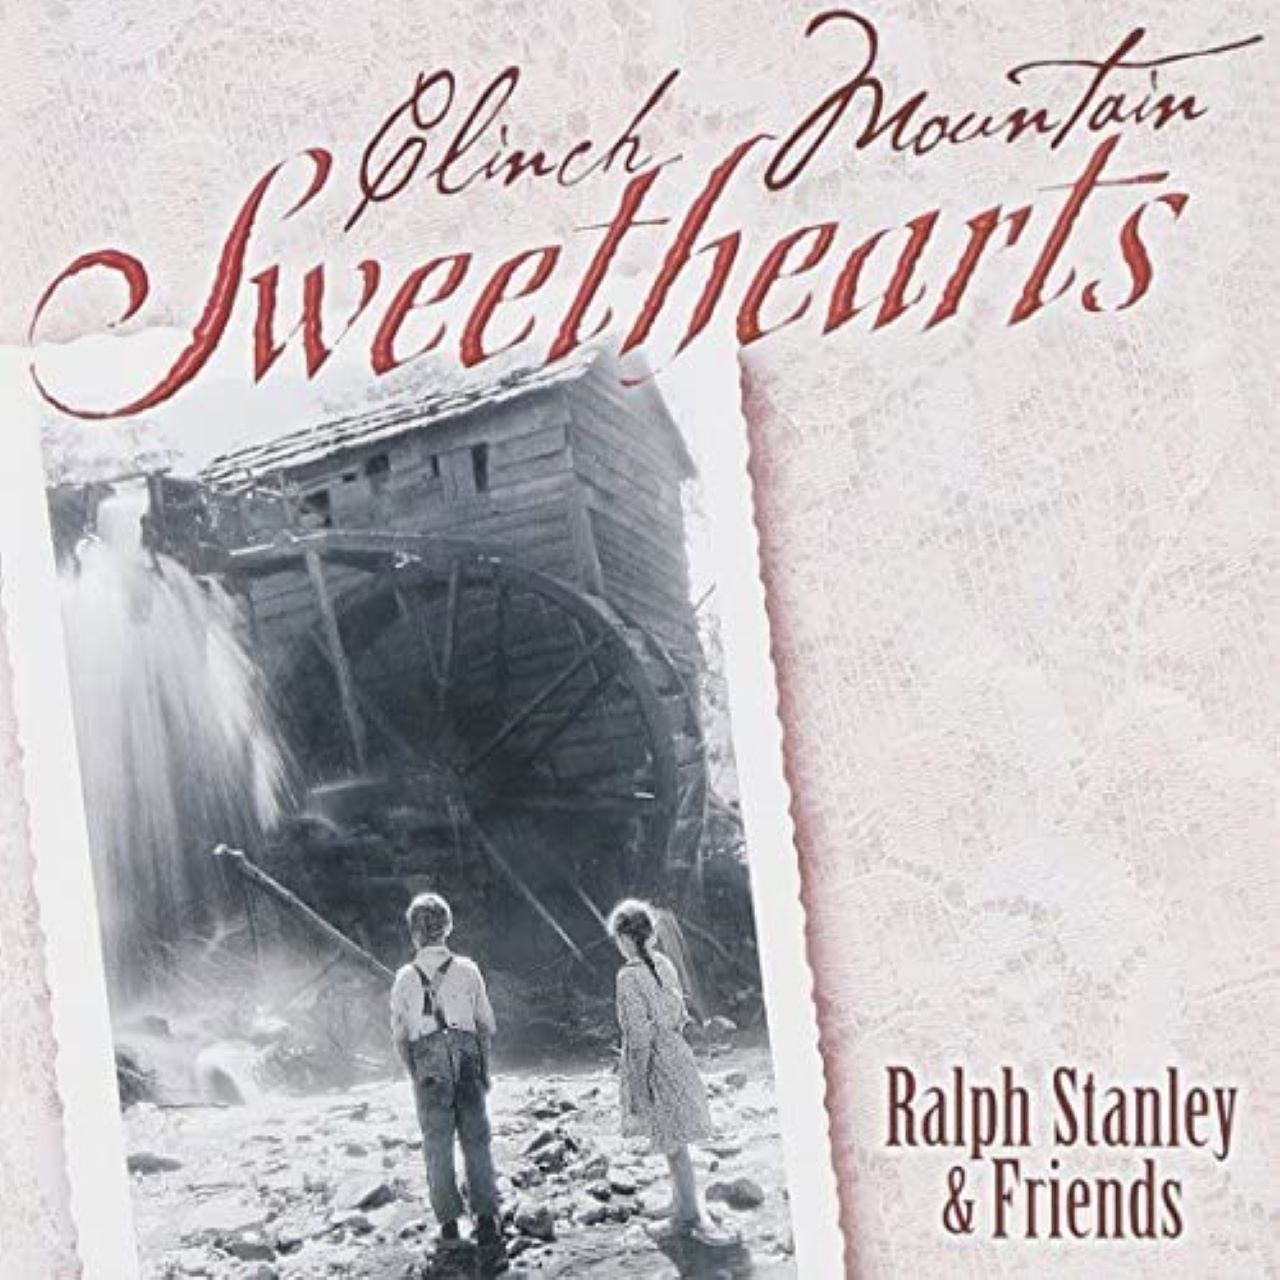 Ralph Stanley & Friends - Clinch Mountain Sweethearts cover album